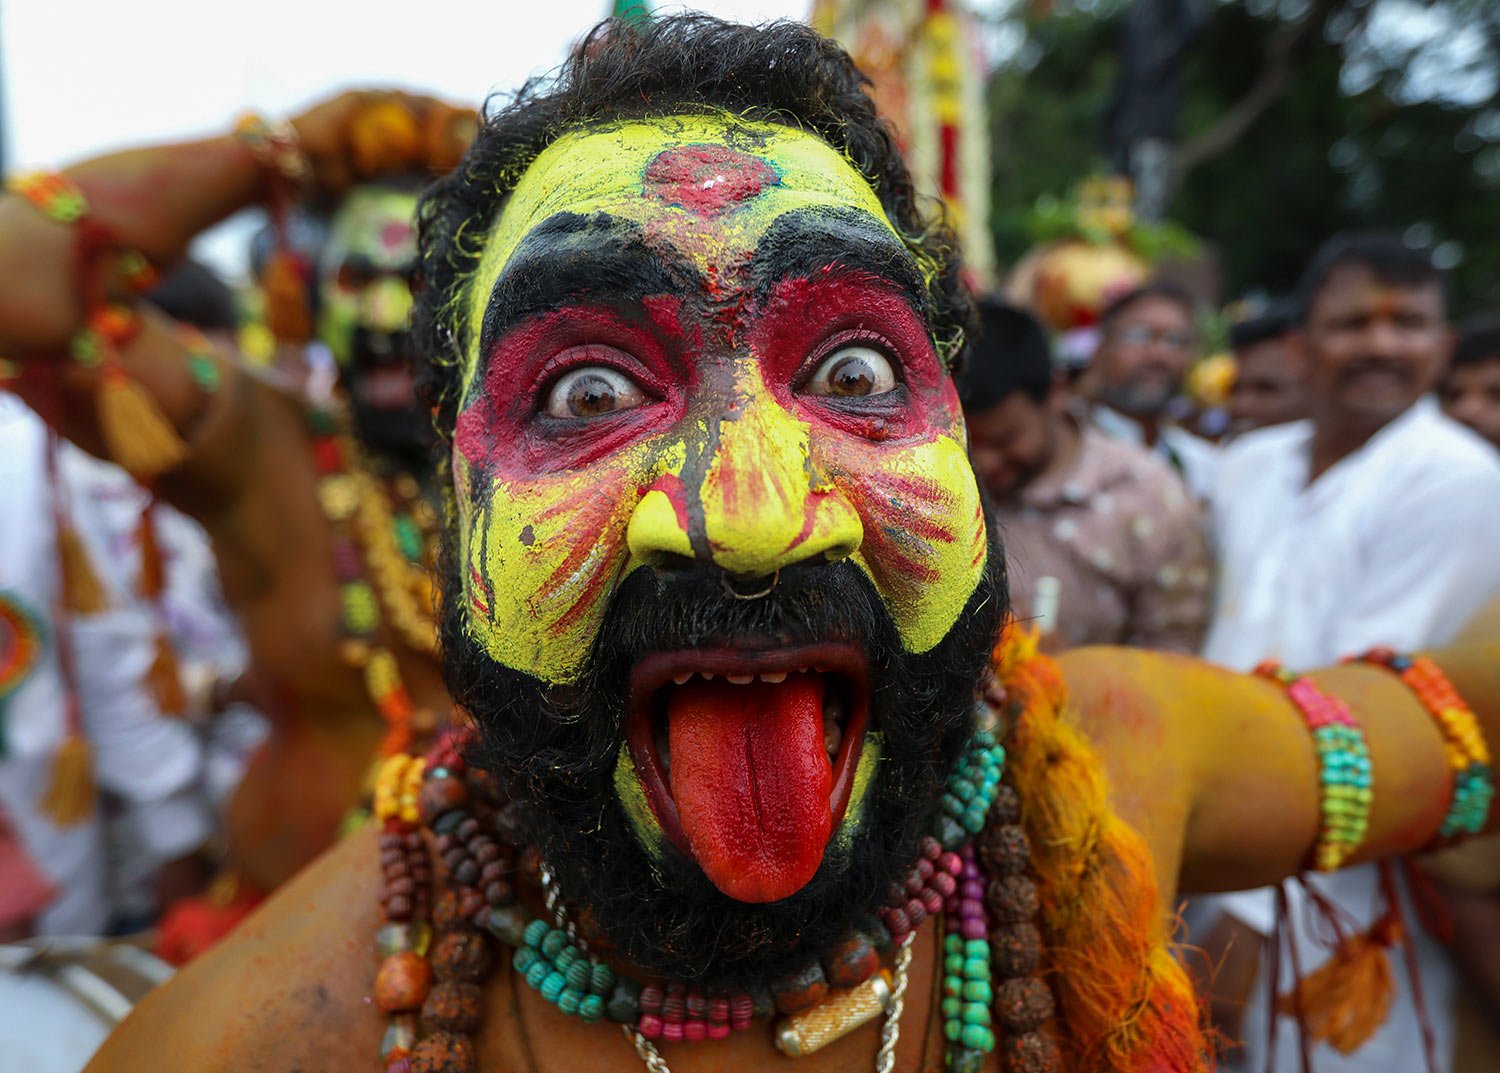  A man dressed as Pothuraju, a mythical character, performs rituals during the Bonalu festival in Hyderabad, India, Thursday, June 30, 2022. (AP Photo/Mahesh Kumar A.) 